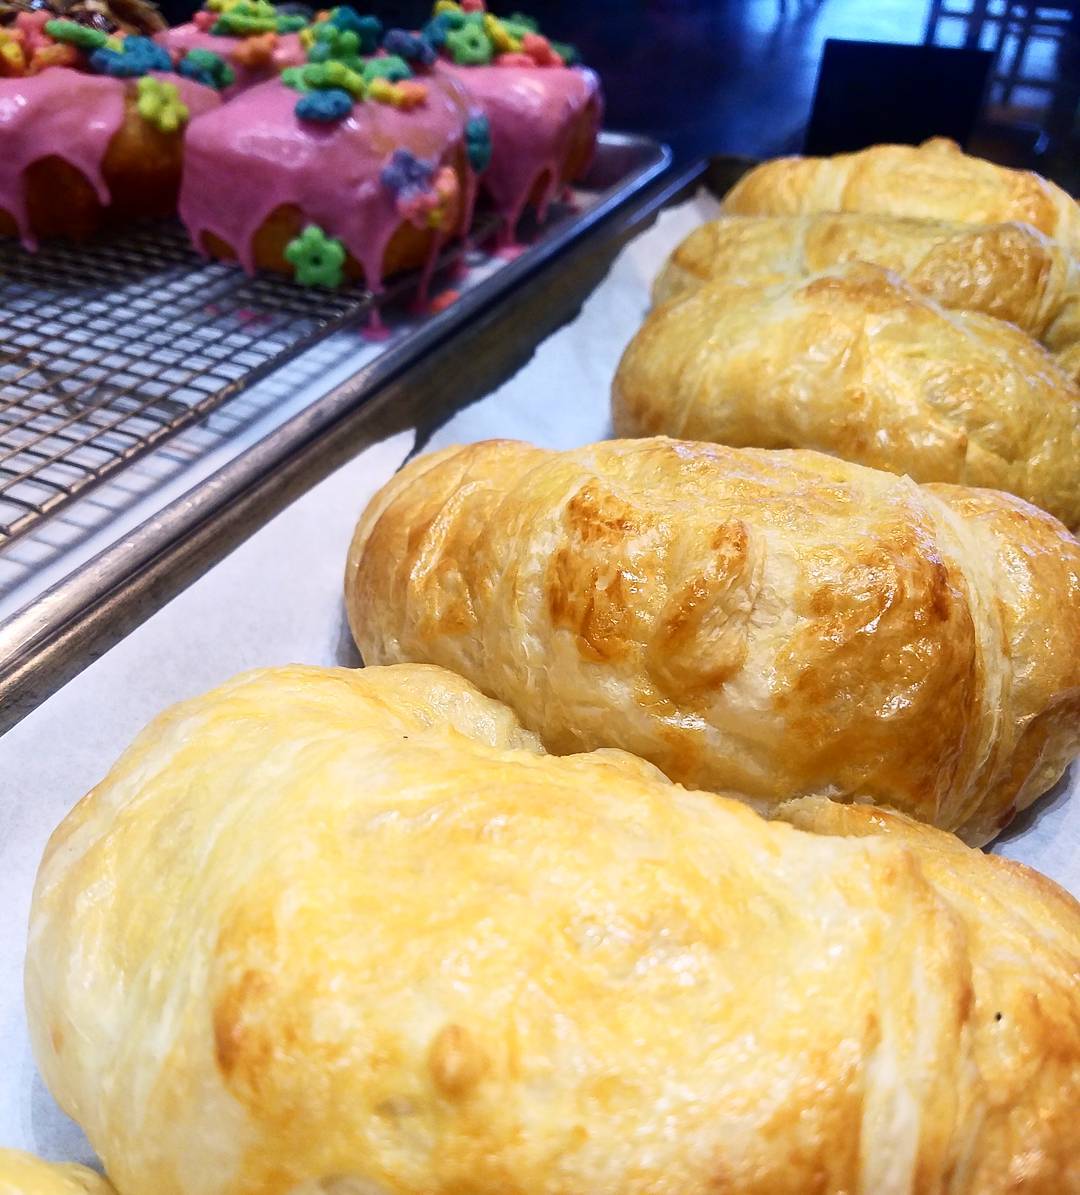 HOT Croissants!!! Plain or in one of our famous breakfast sandwiches…puffy, buttery and beautiful!!! @bellekitchenokc @bellekitchendd #eats